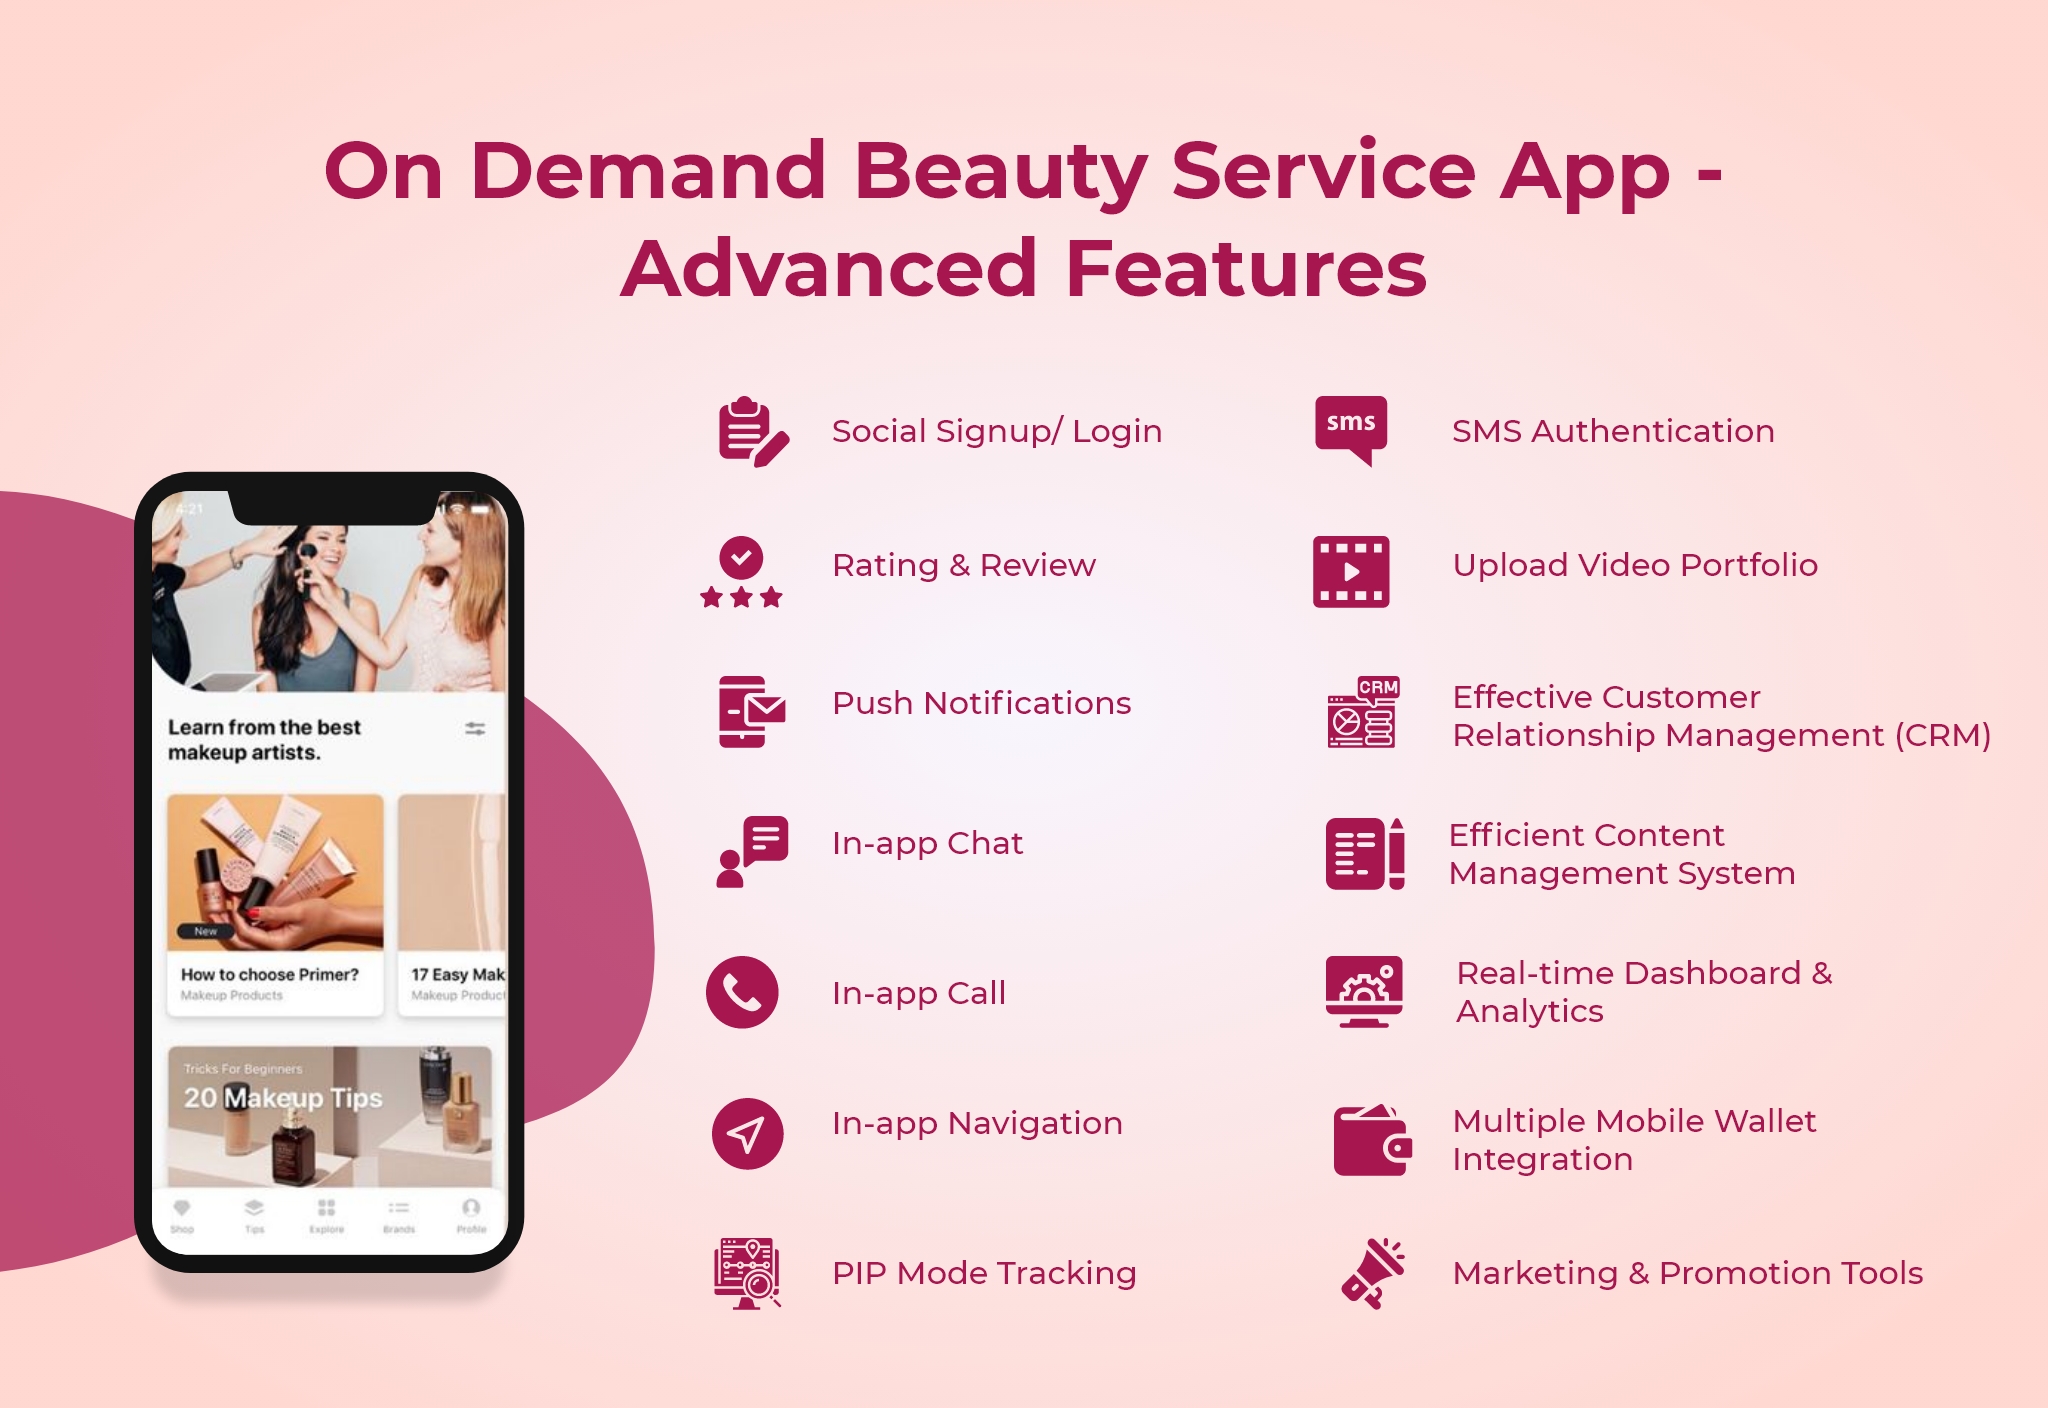 on demand beauty service app features